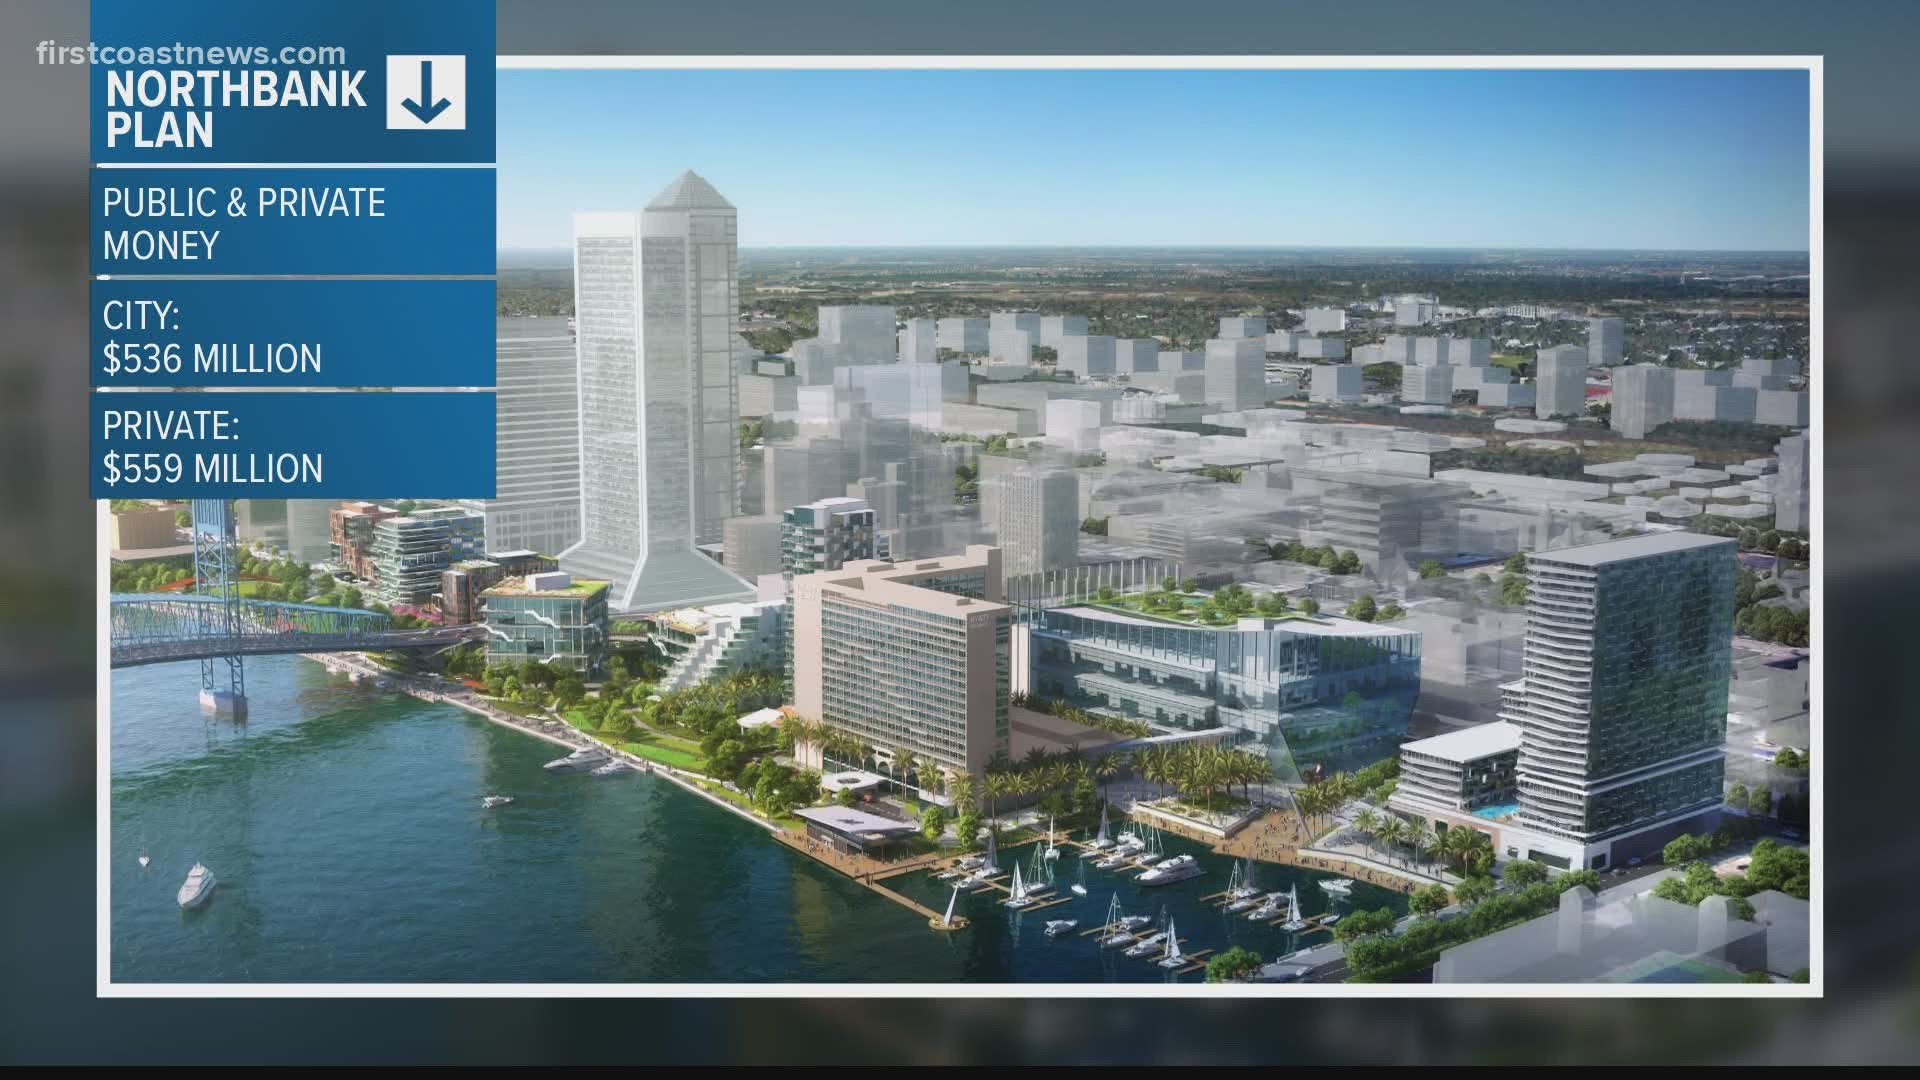 The plan would bring 10 new buildings to the former Landing, with living space, underground parking garages, parks, marina improvements, hotels and retail space.